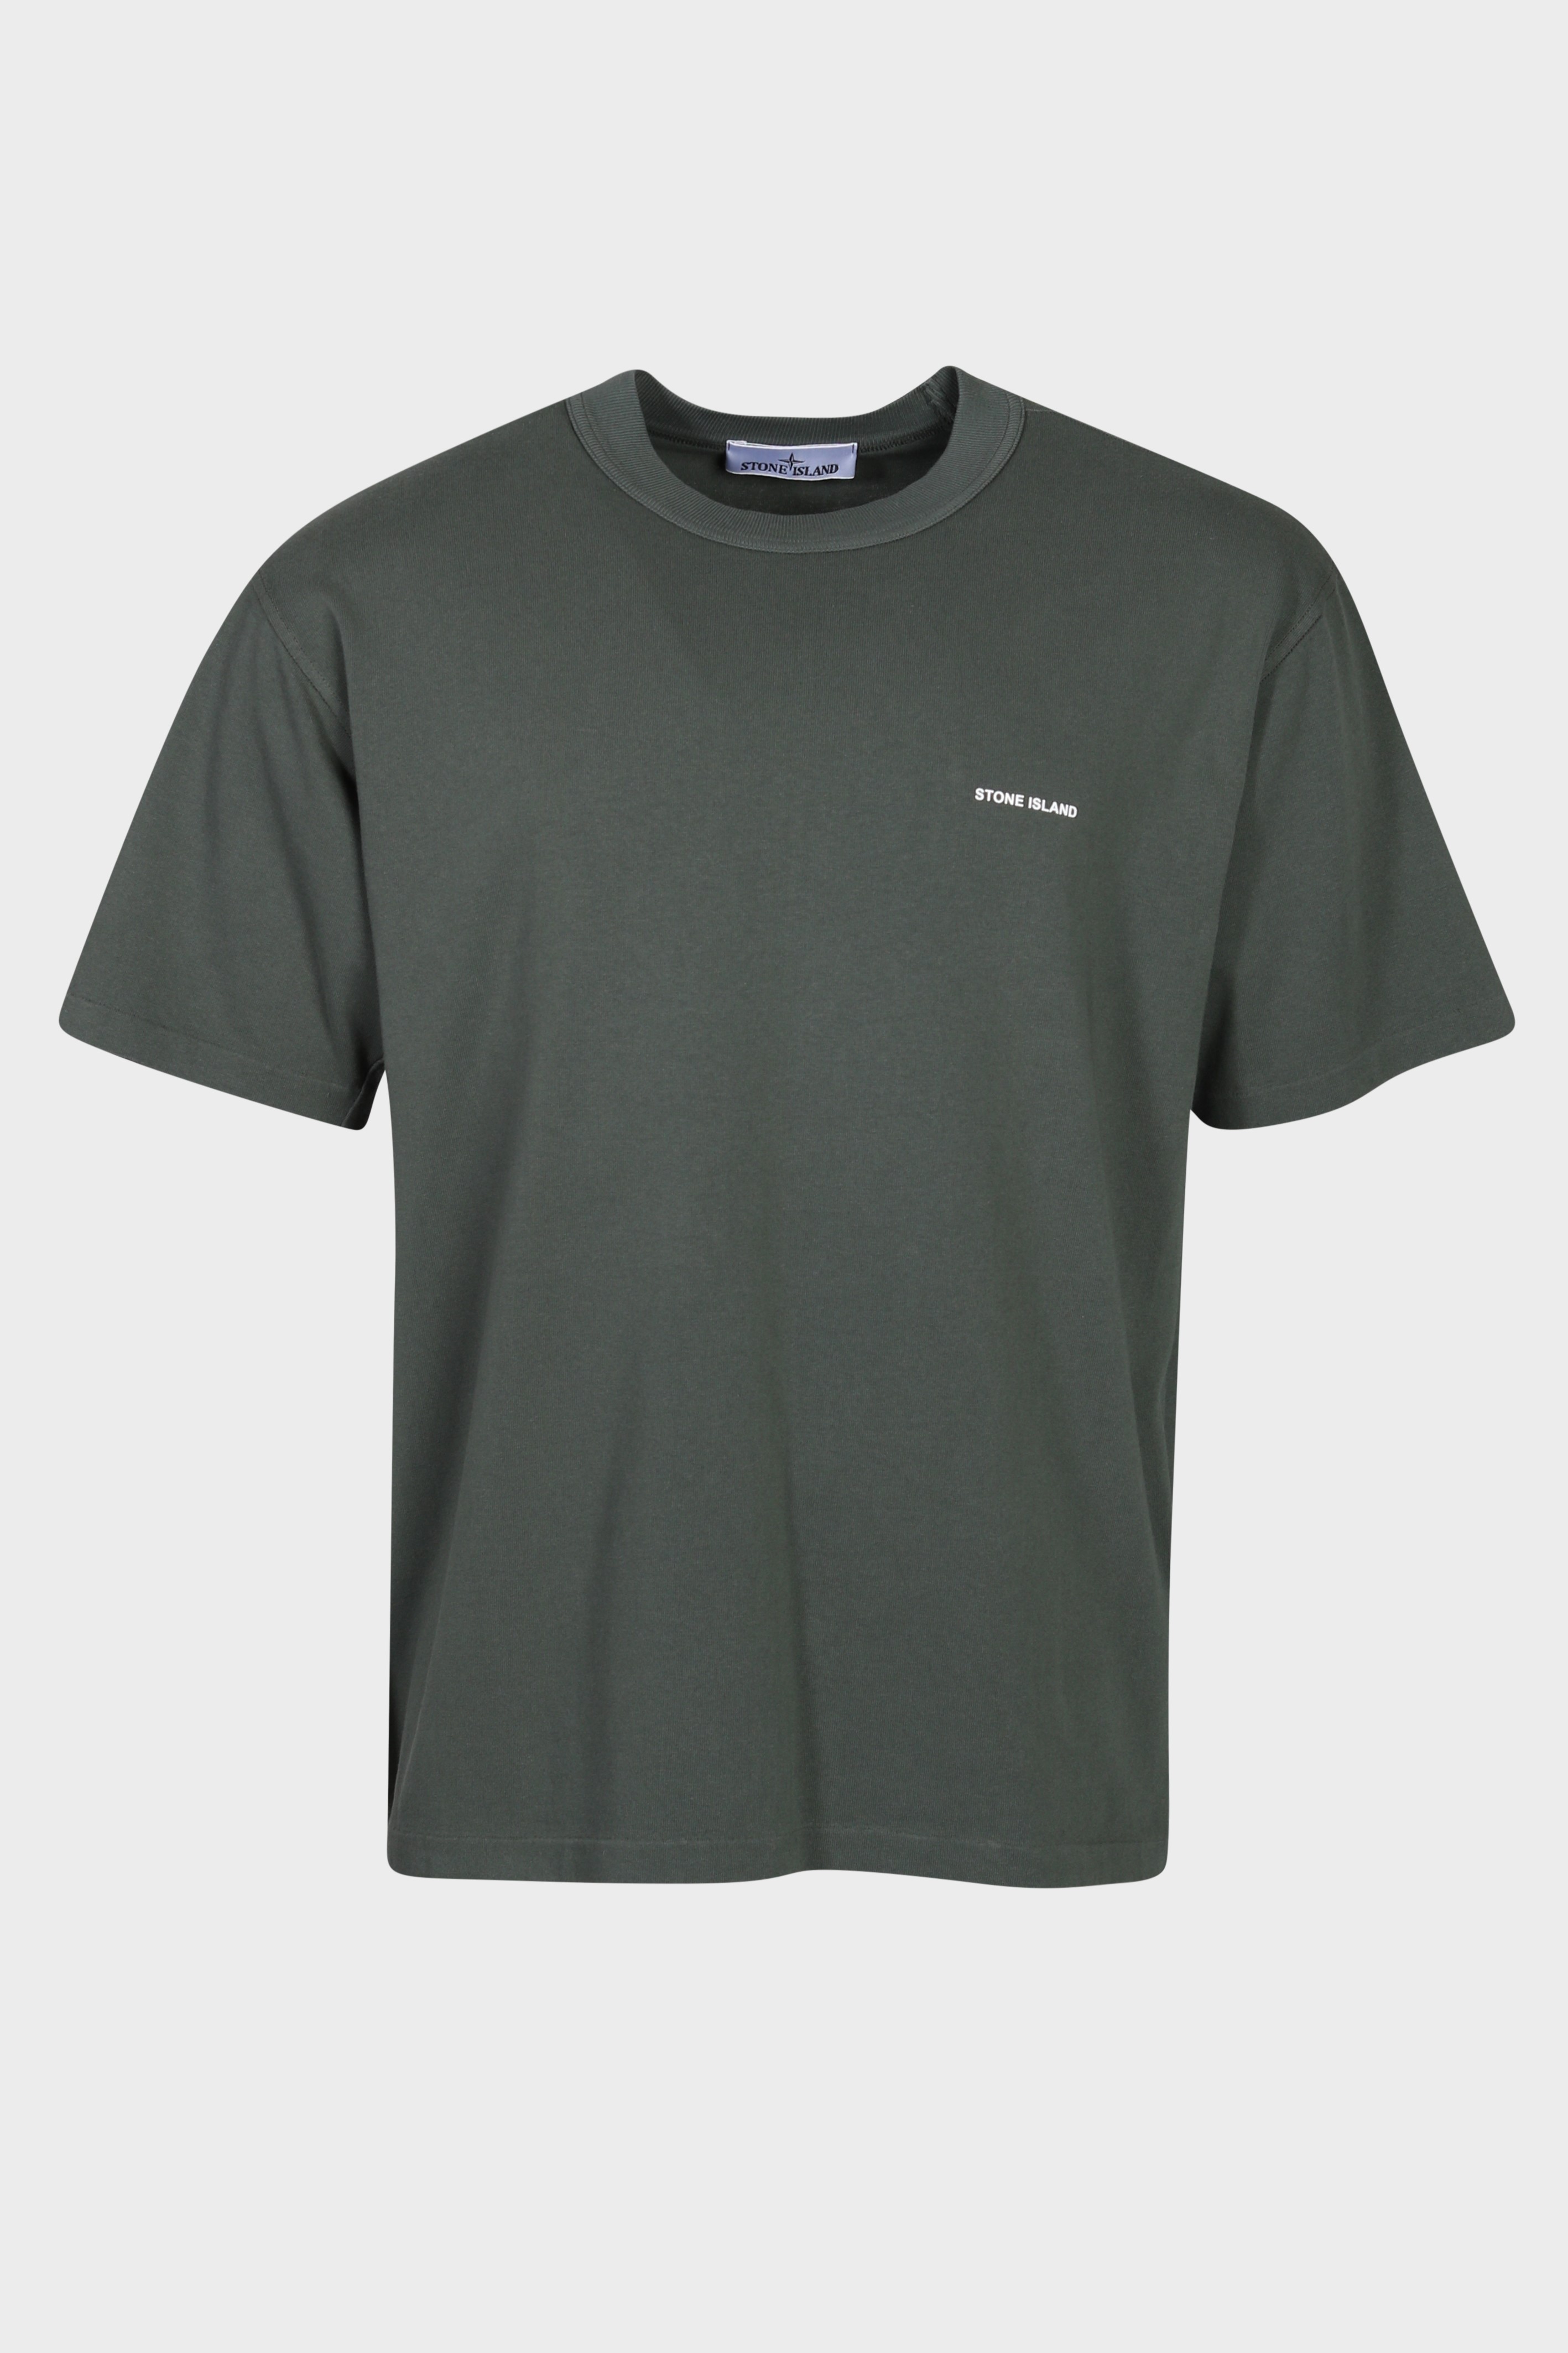 STONE ISLAND Stamp T-Shirt in Green